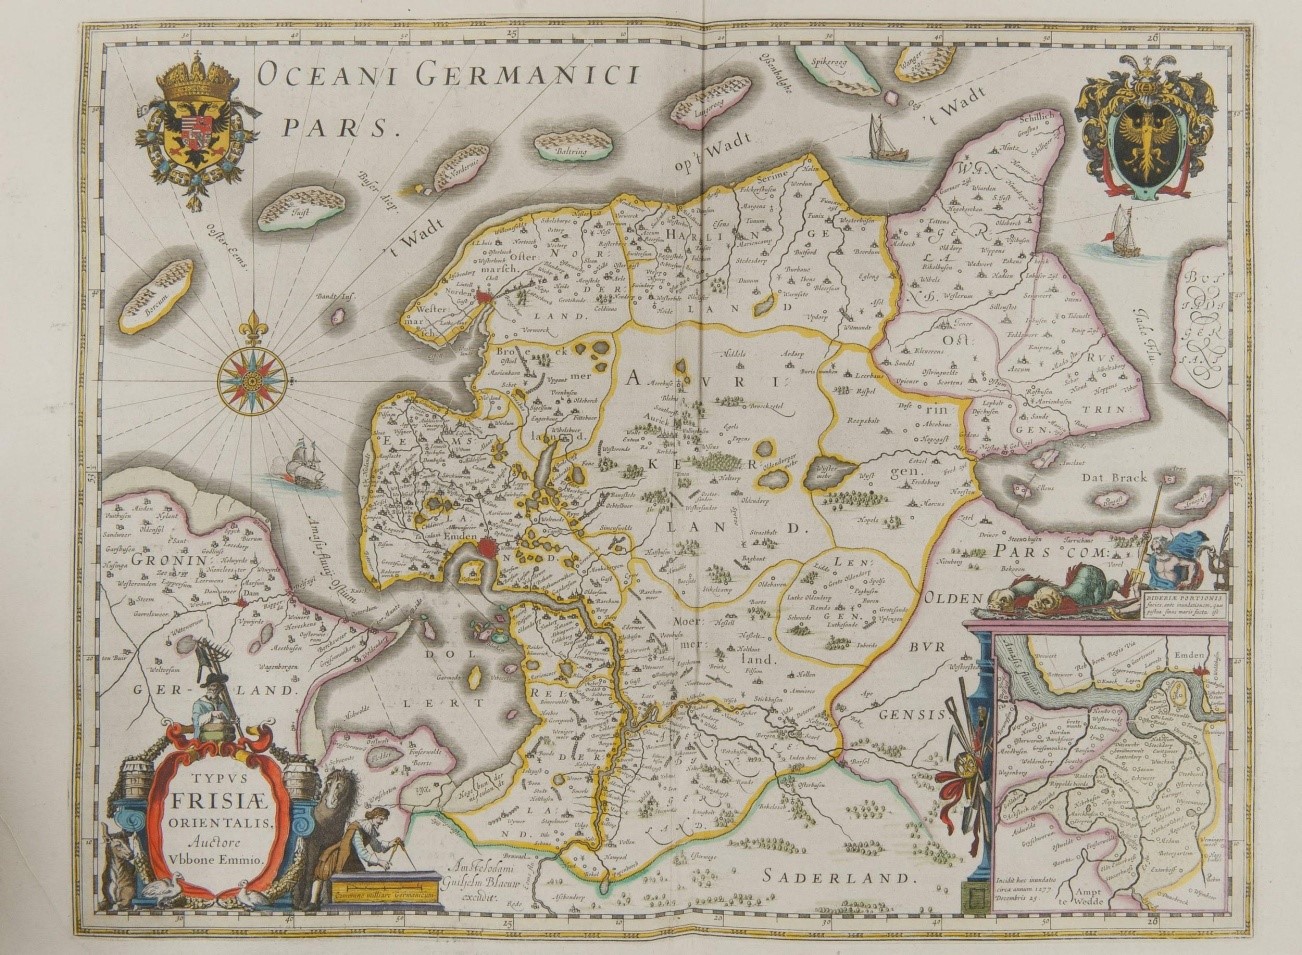 slide 6: This map, also by Emmius, was printed in 1664 by Willem Janszoons Blaeu in Amsterdam, in J. Blaeus Grooten atlas, oft werelt-beschryving, in welcke ‘t aertryck, de zee en hemel wordt vertoont en beschreven. The flood of 1277 is mentioned once again. Emmius pleaded for a more historically realistic represen-tation of the past, in both books and maps. Because his map of 1616 does not mention the 1277 flood, we cannot be sure whether he deliberately perpetuated the mythical flood in this map, or did so for reasons that were perhaps beyond his control.